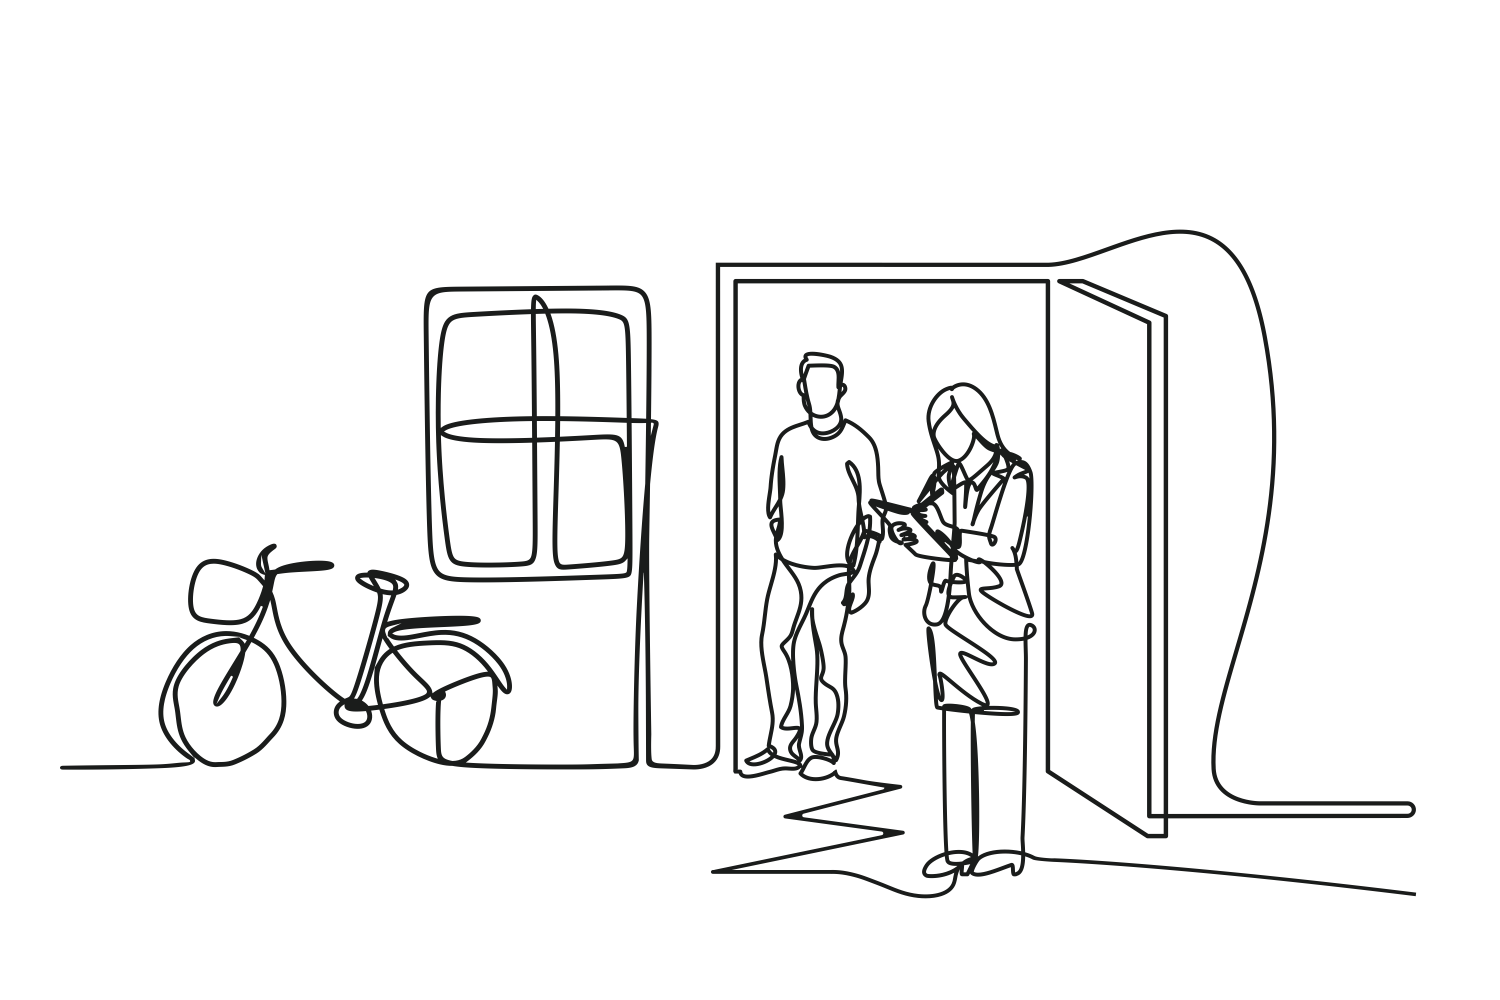 An illustration of two people talking at a front door